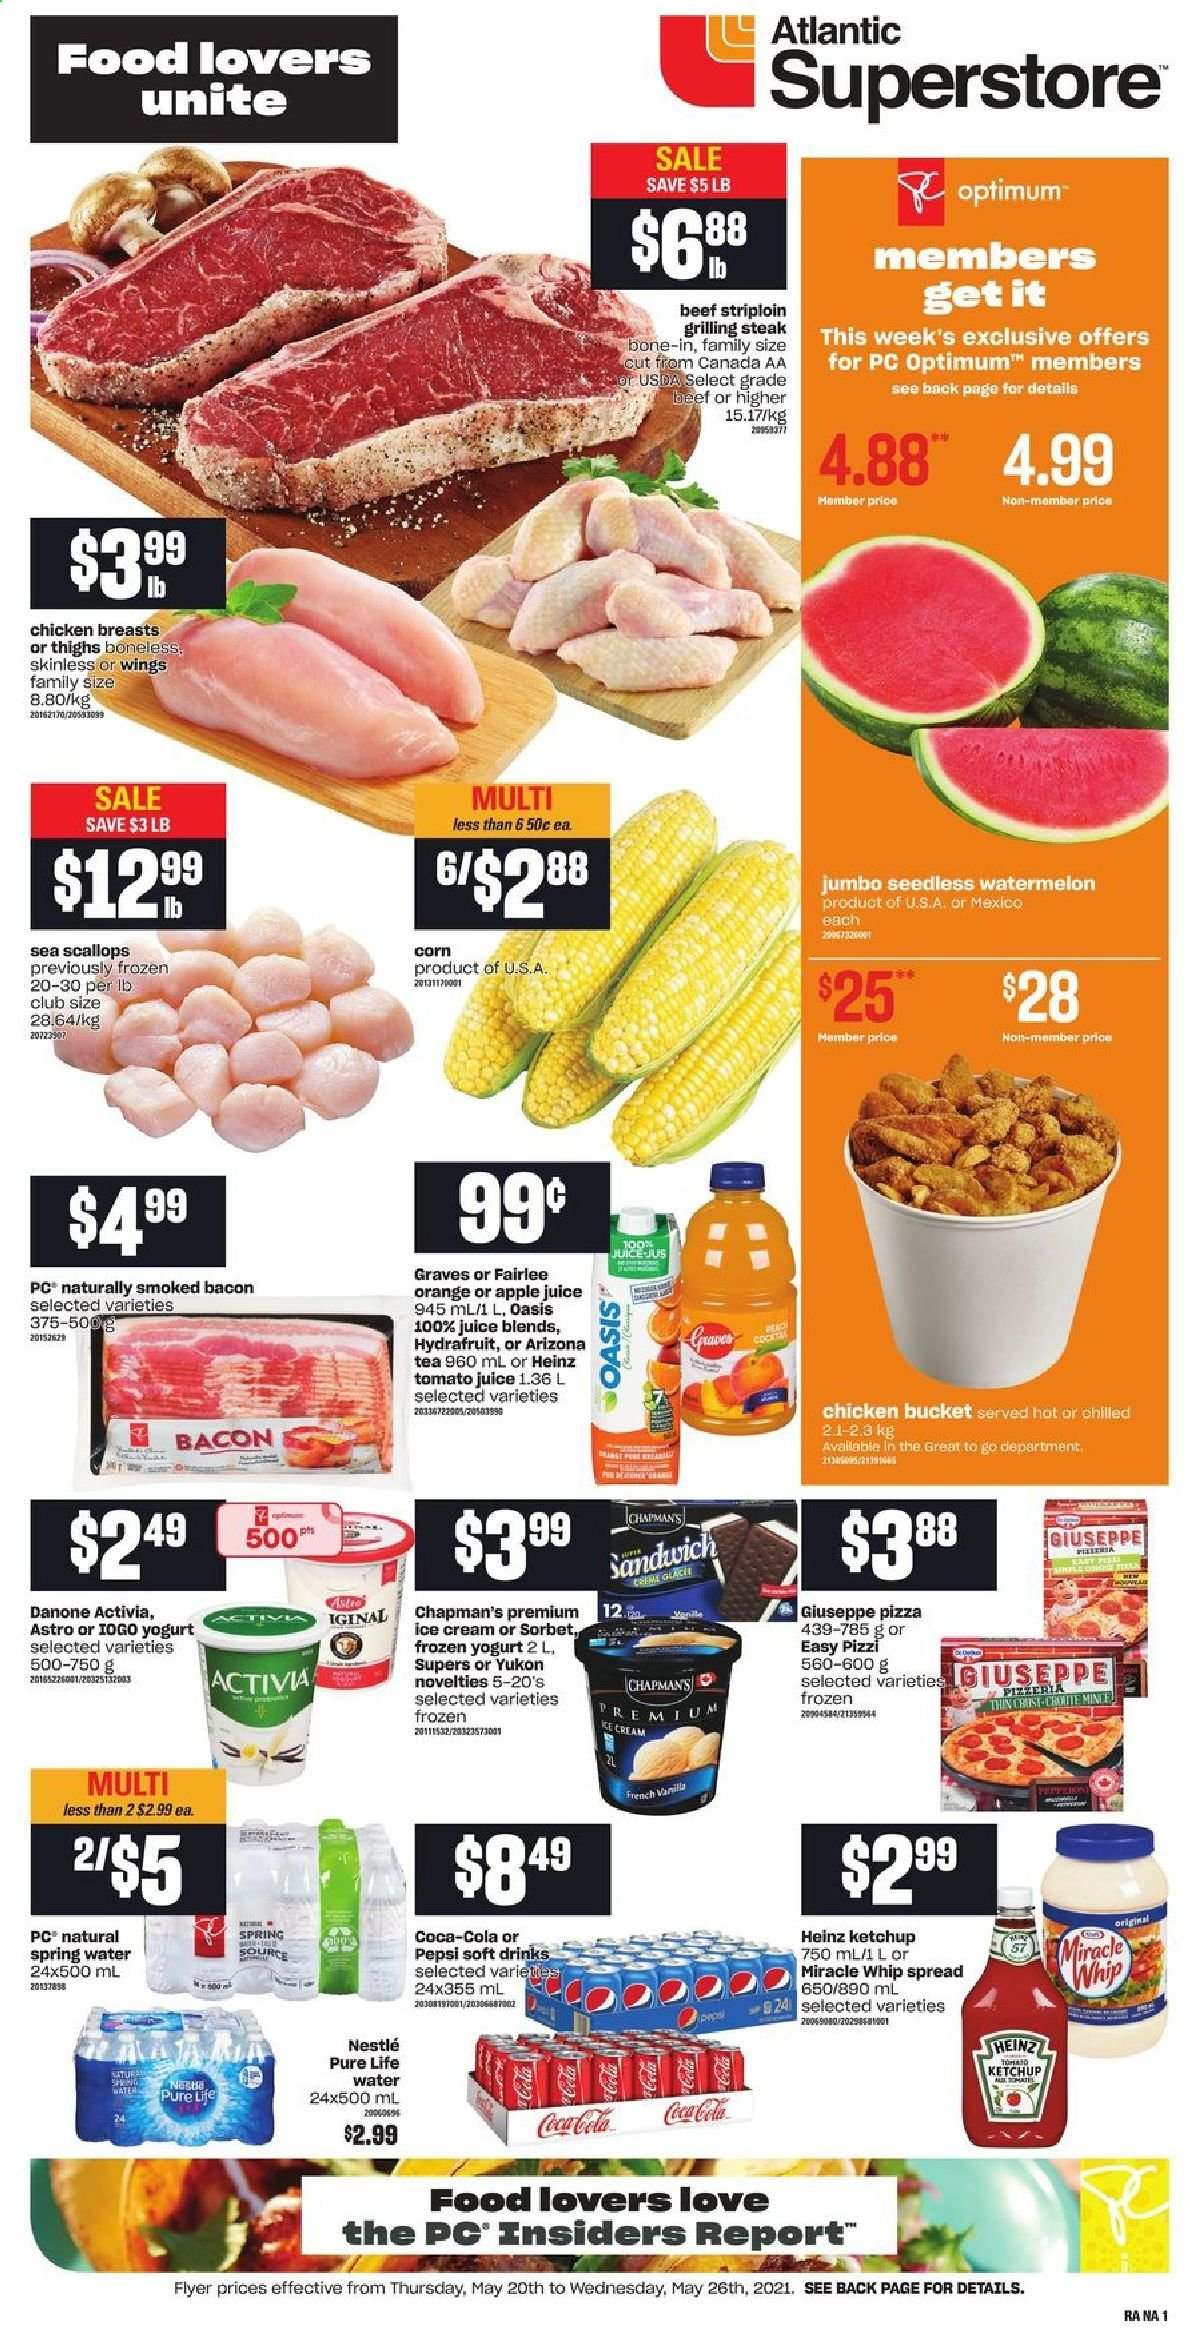 Atlantic Superstore flyer  - May 20, 2021 - May 26, 2021. Page 1.